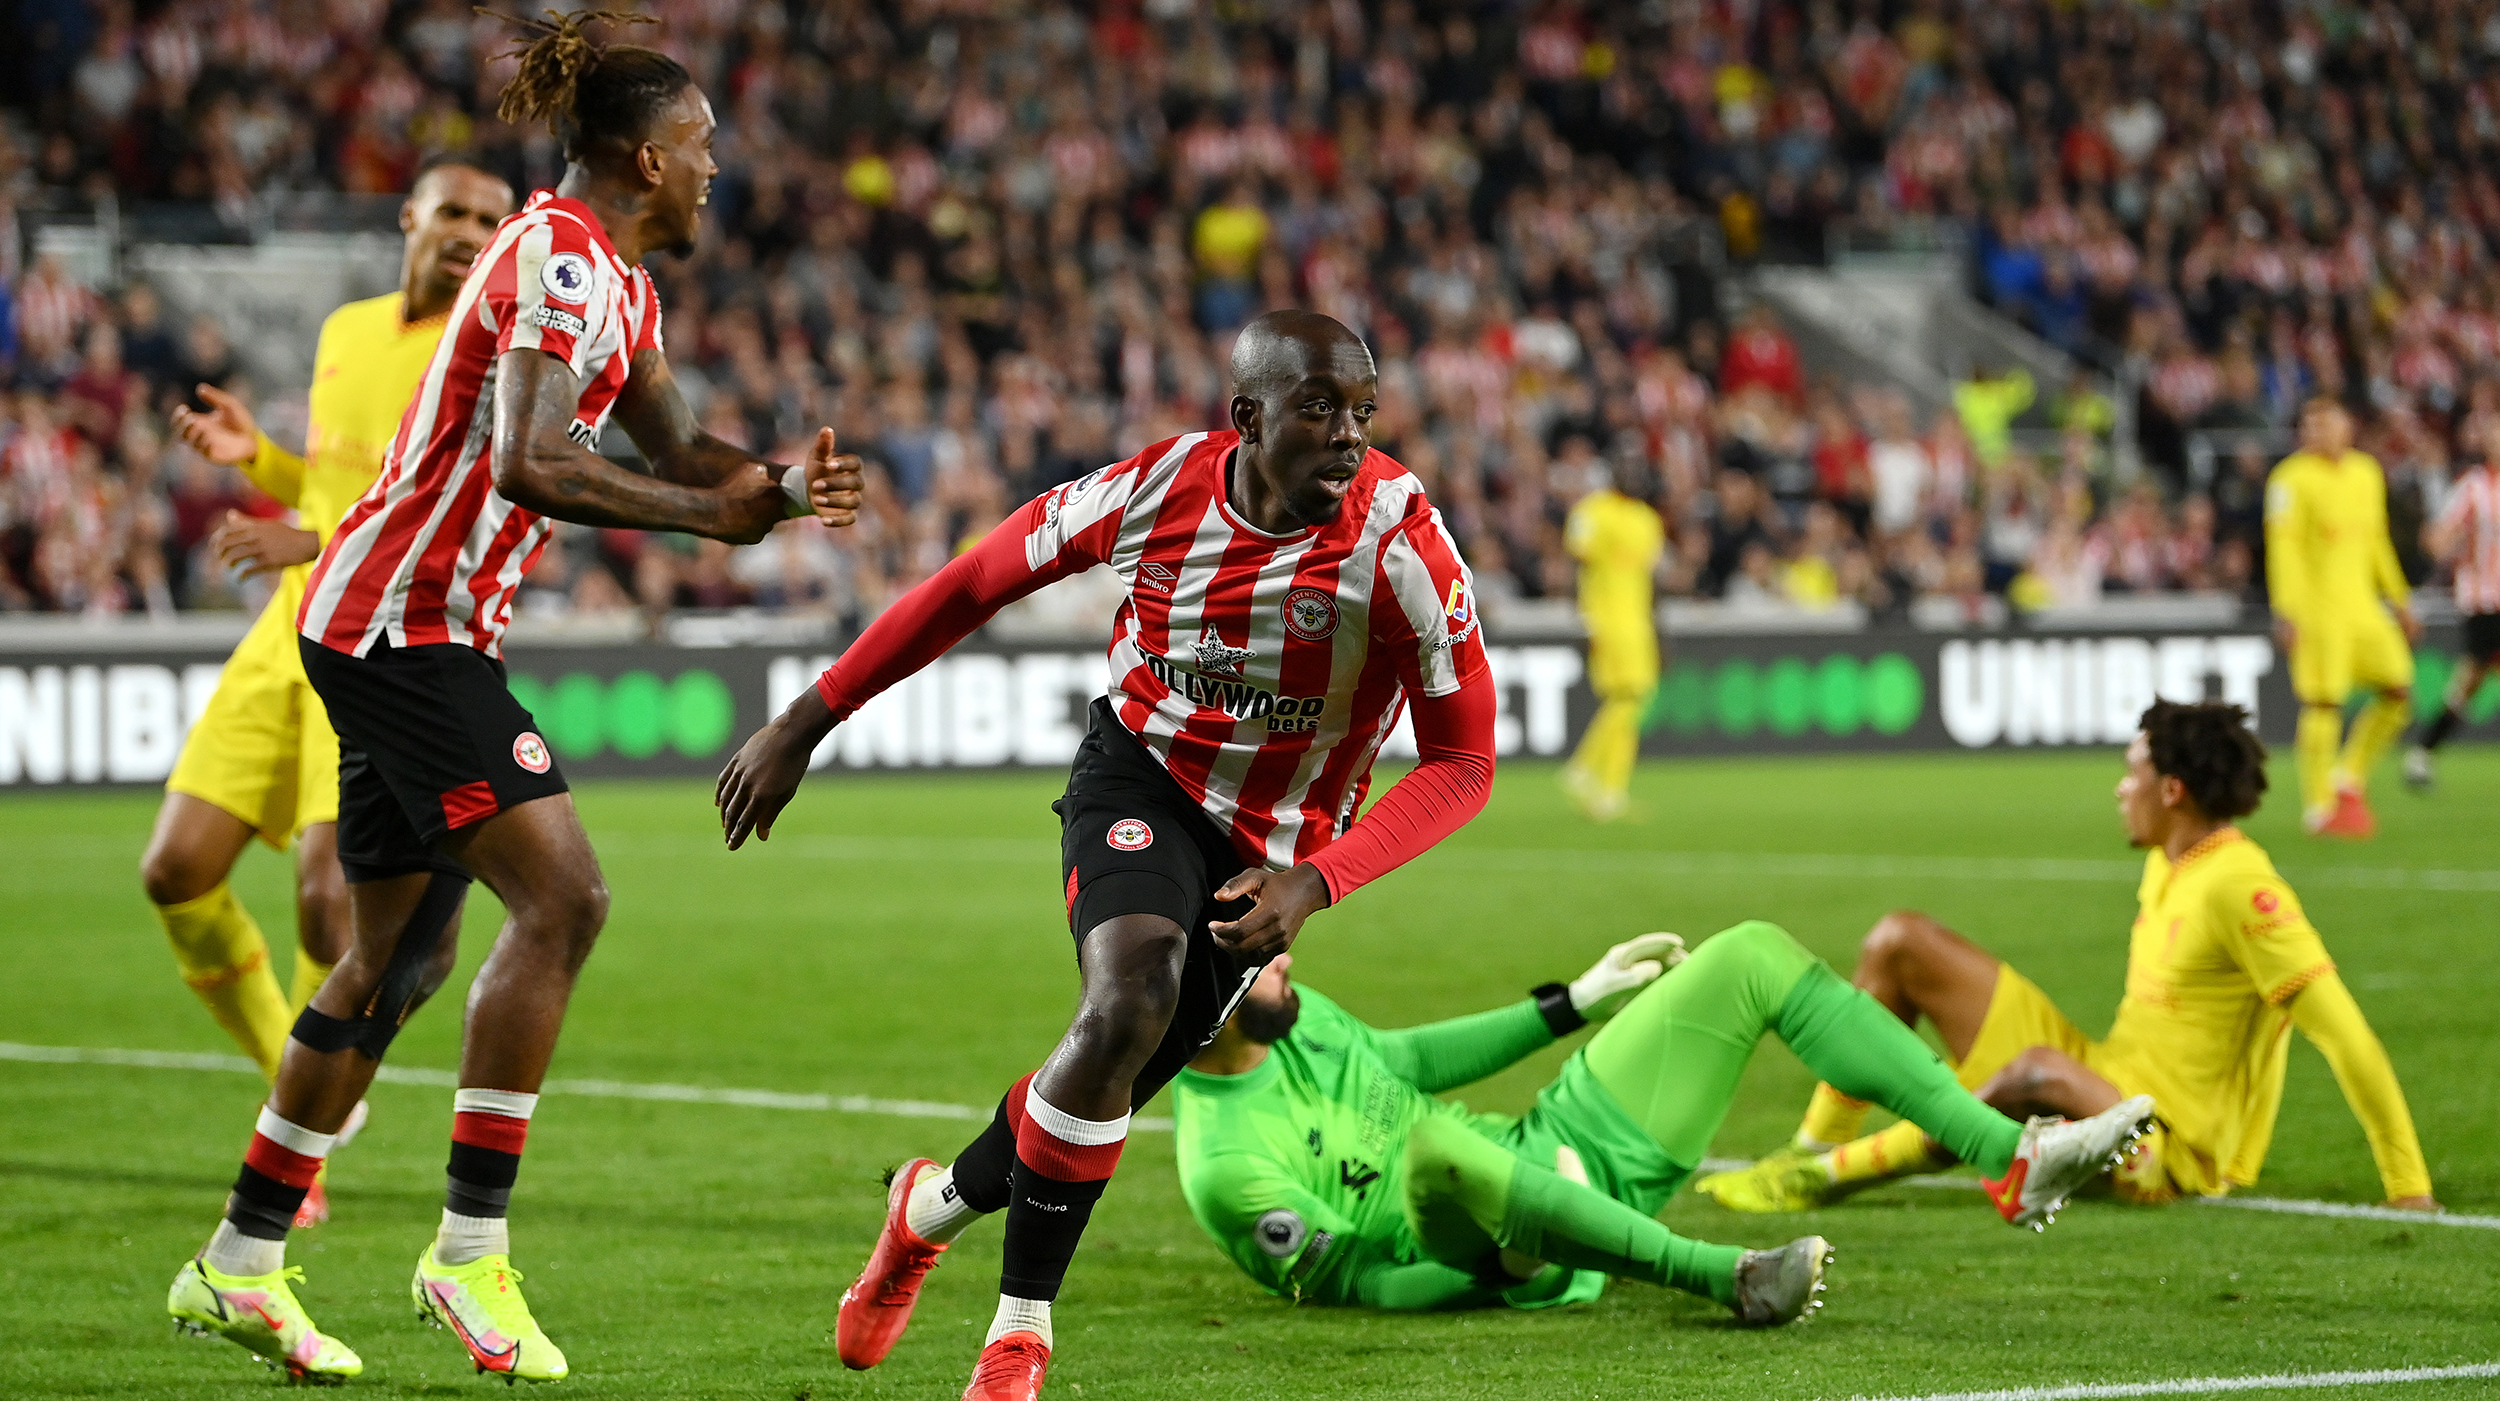 Yoane Wissa of Brentford celebrates scoring his sides third goal during the Premier League match between Brentford and Liverpool at Brentford Community Stadium on September 25, 2021 in Brentford, England.